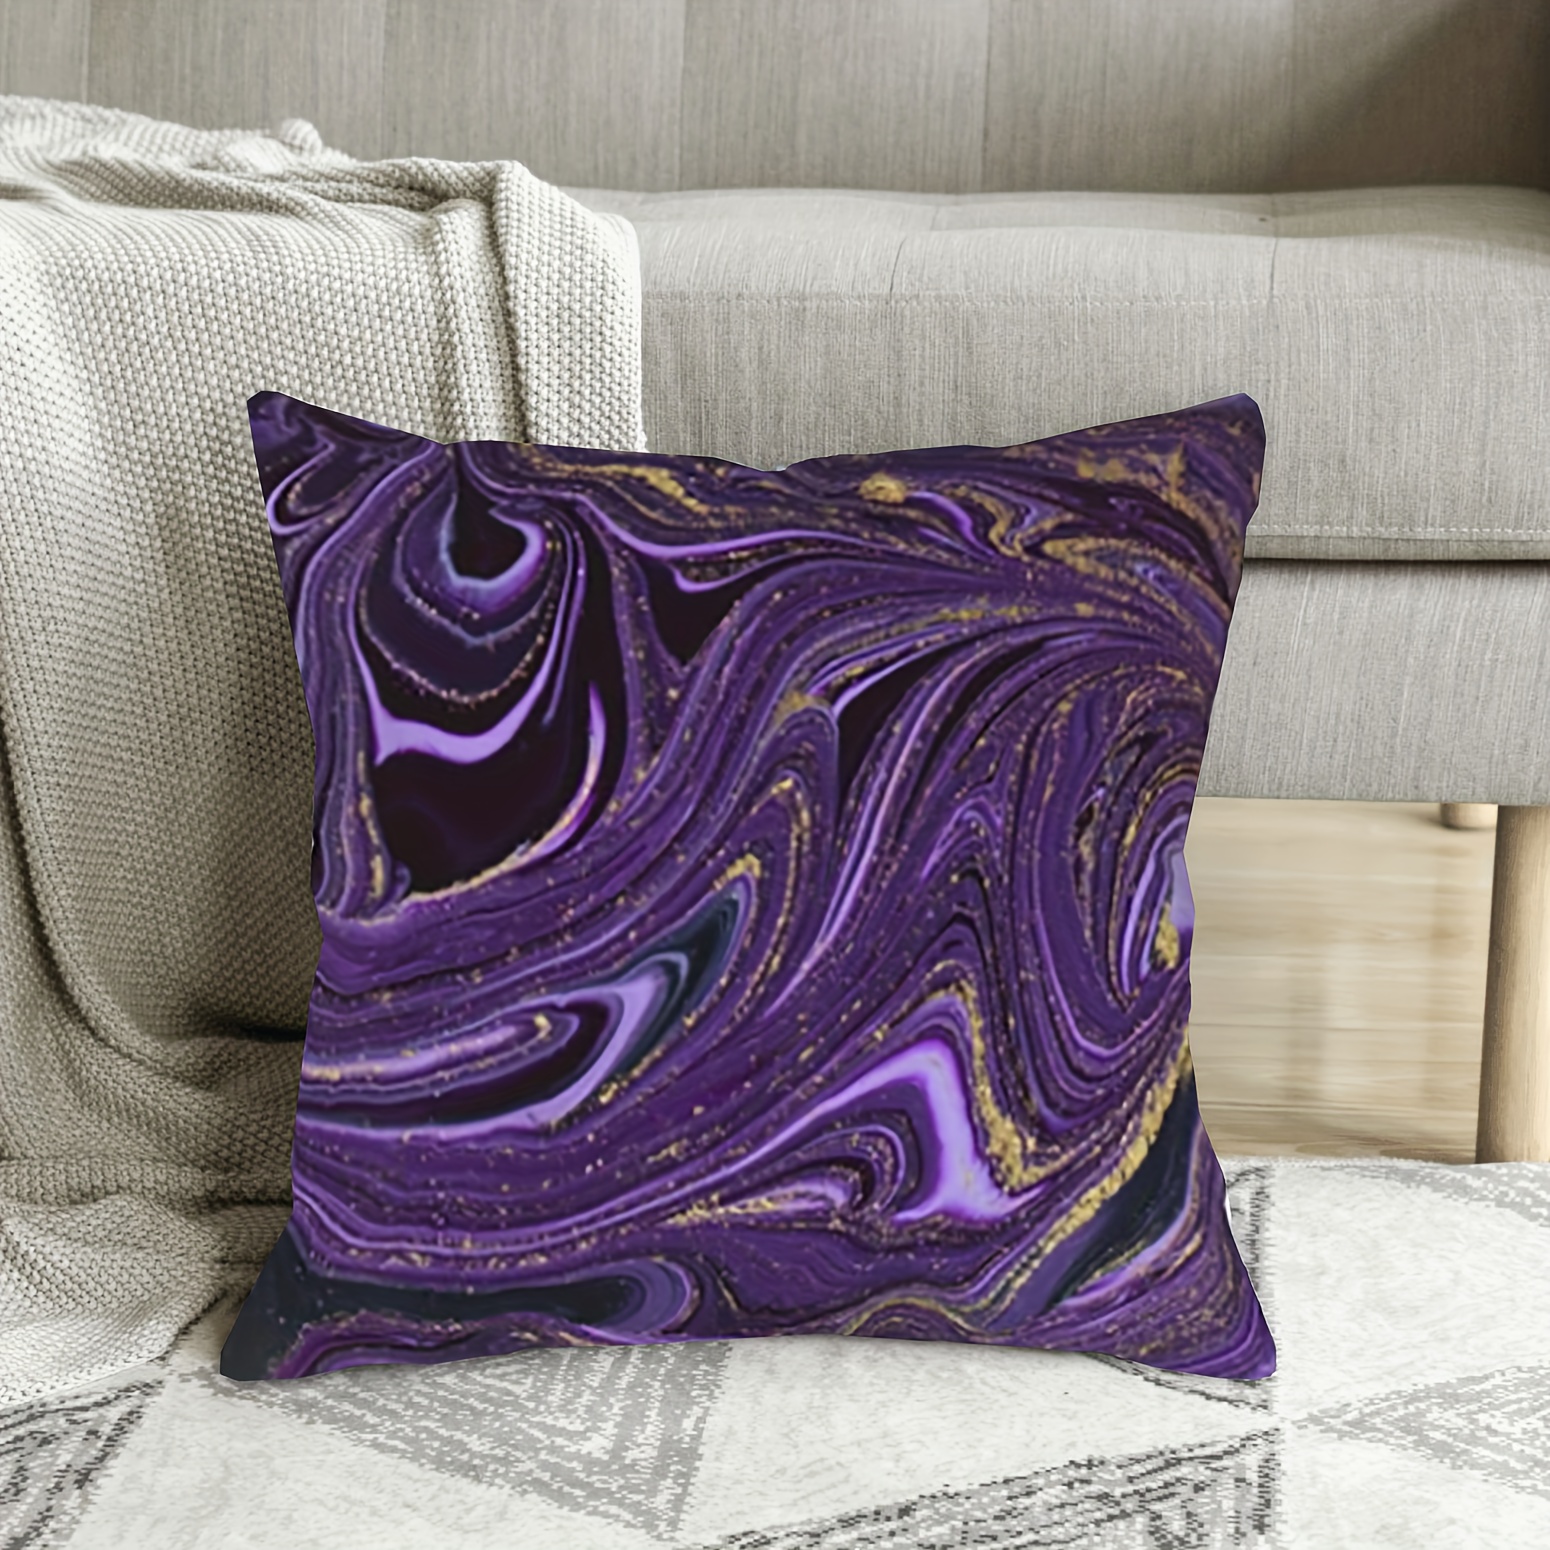 Soft Aesthetic Decorative Throw Pillow Covers 18x18 Inch Abstract